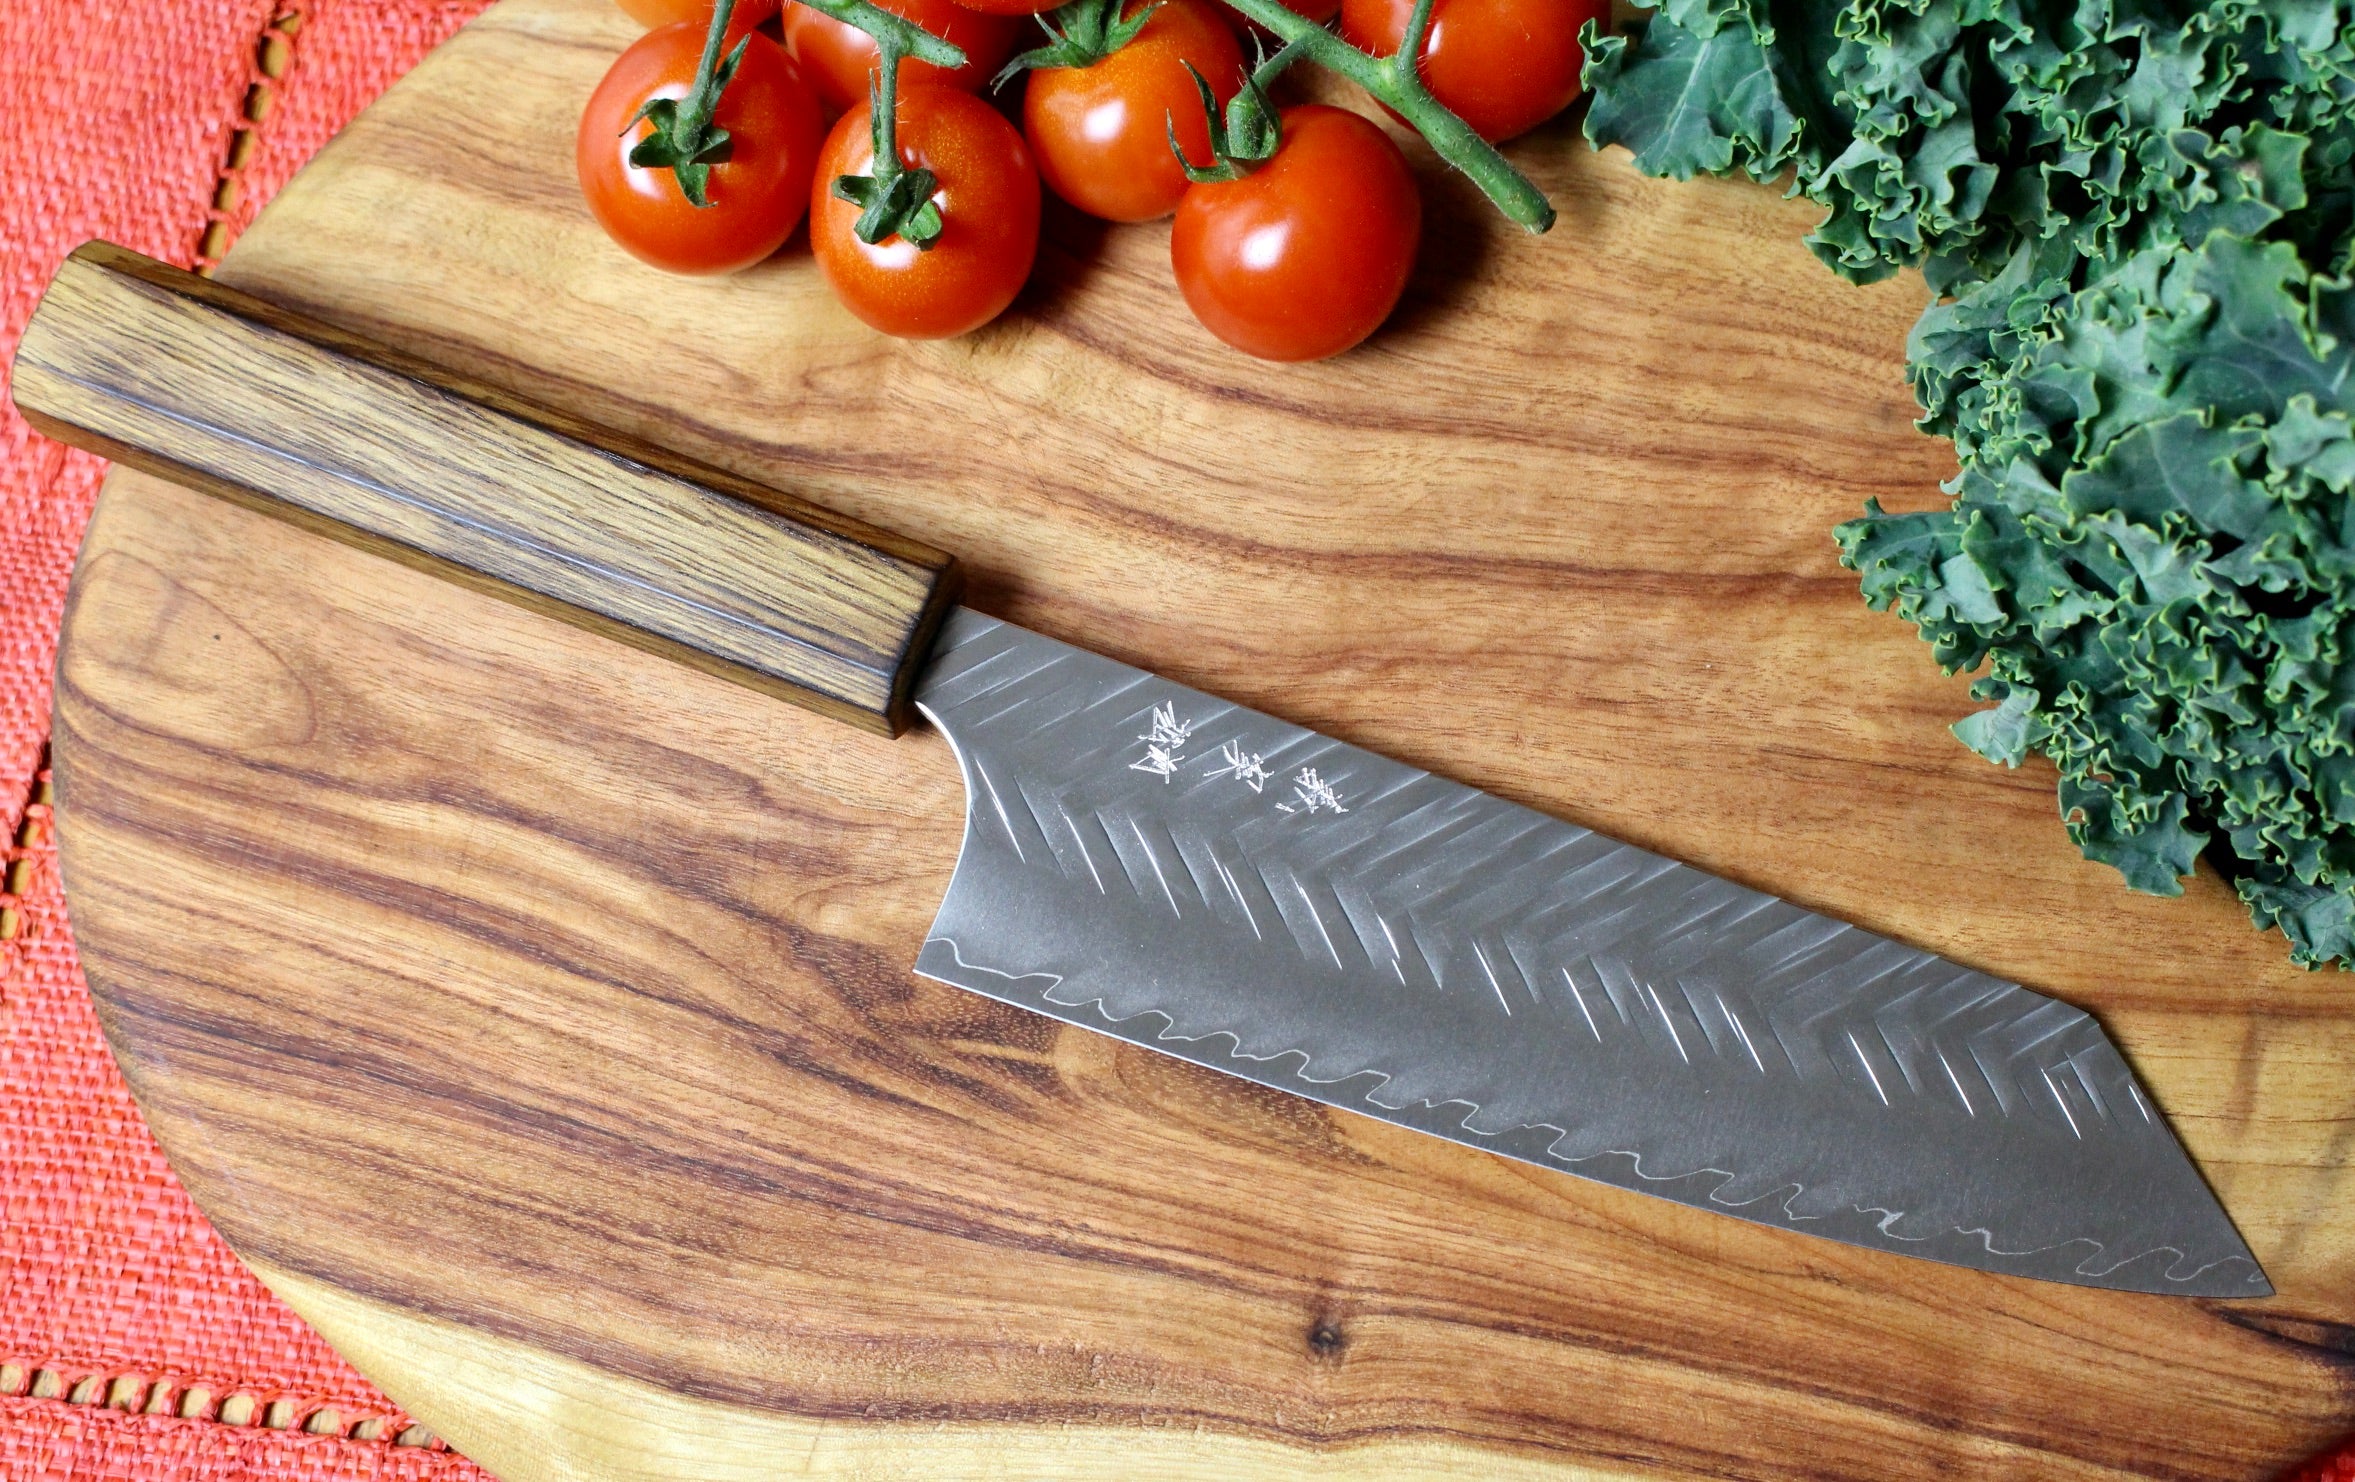 Mikazuki Knives - Online shop of high quality Japanese cooking knives